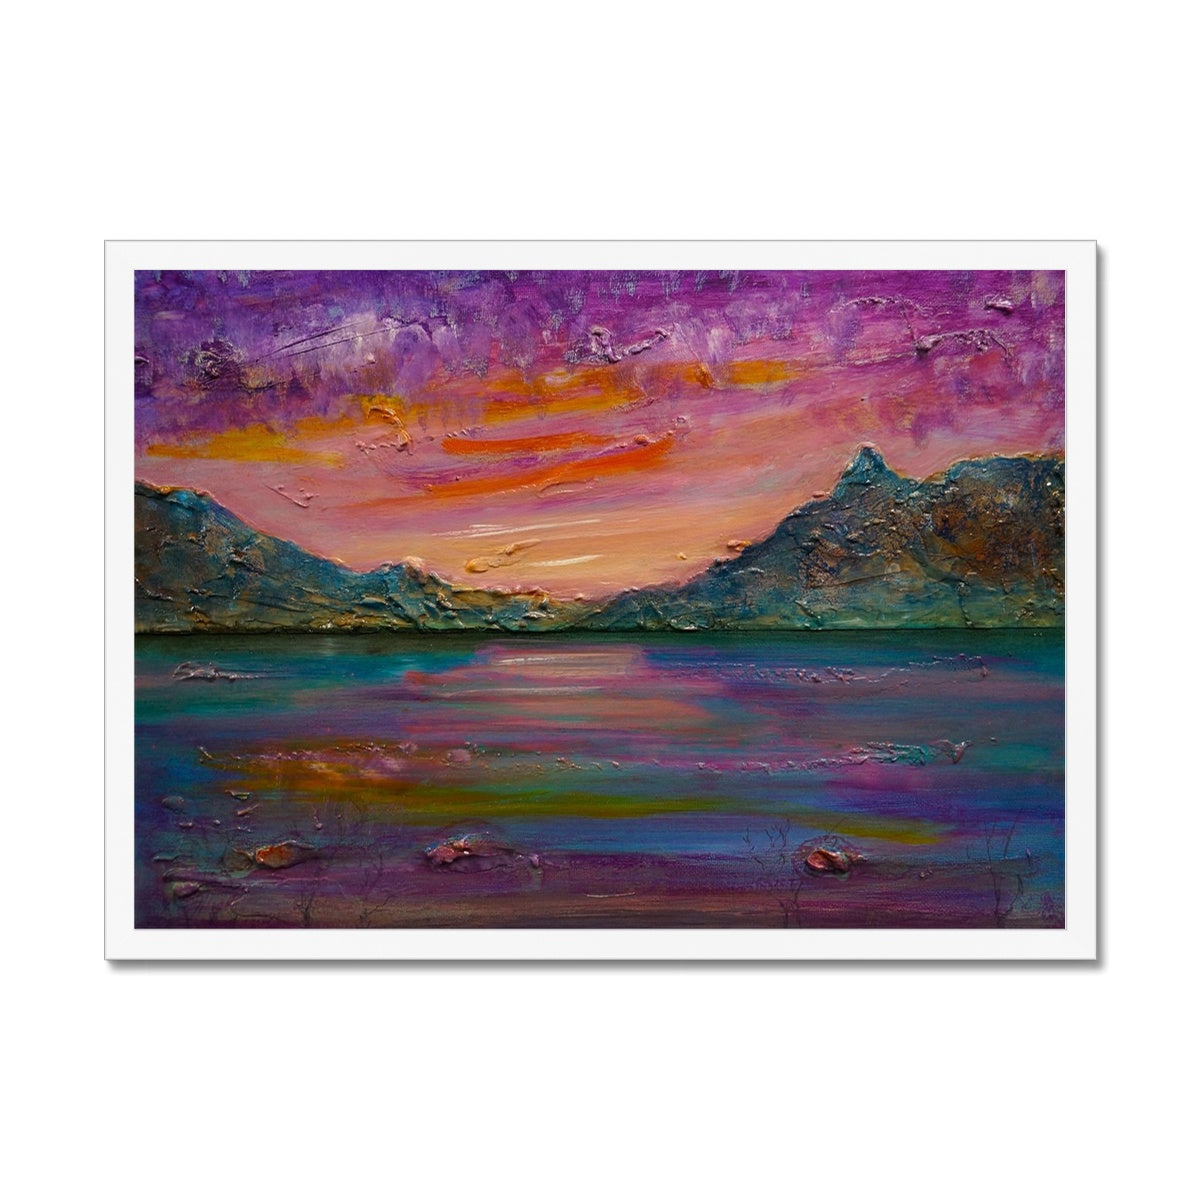 Loch Leven Sunset Painting | Framed Prints From Scotland-Framed Prints-Scottish Lochs & Mountains Art Gallery-A2 Landscape-White Frame-Paintings, Prints, Homeware, Art Gifts From Scotland By Scottish Artist Kevin Hunter